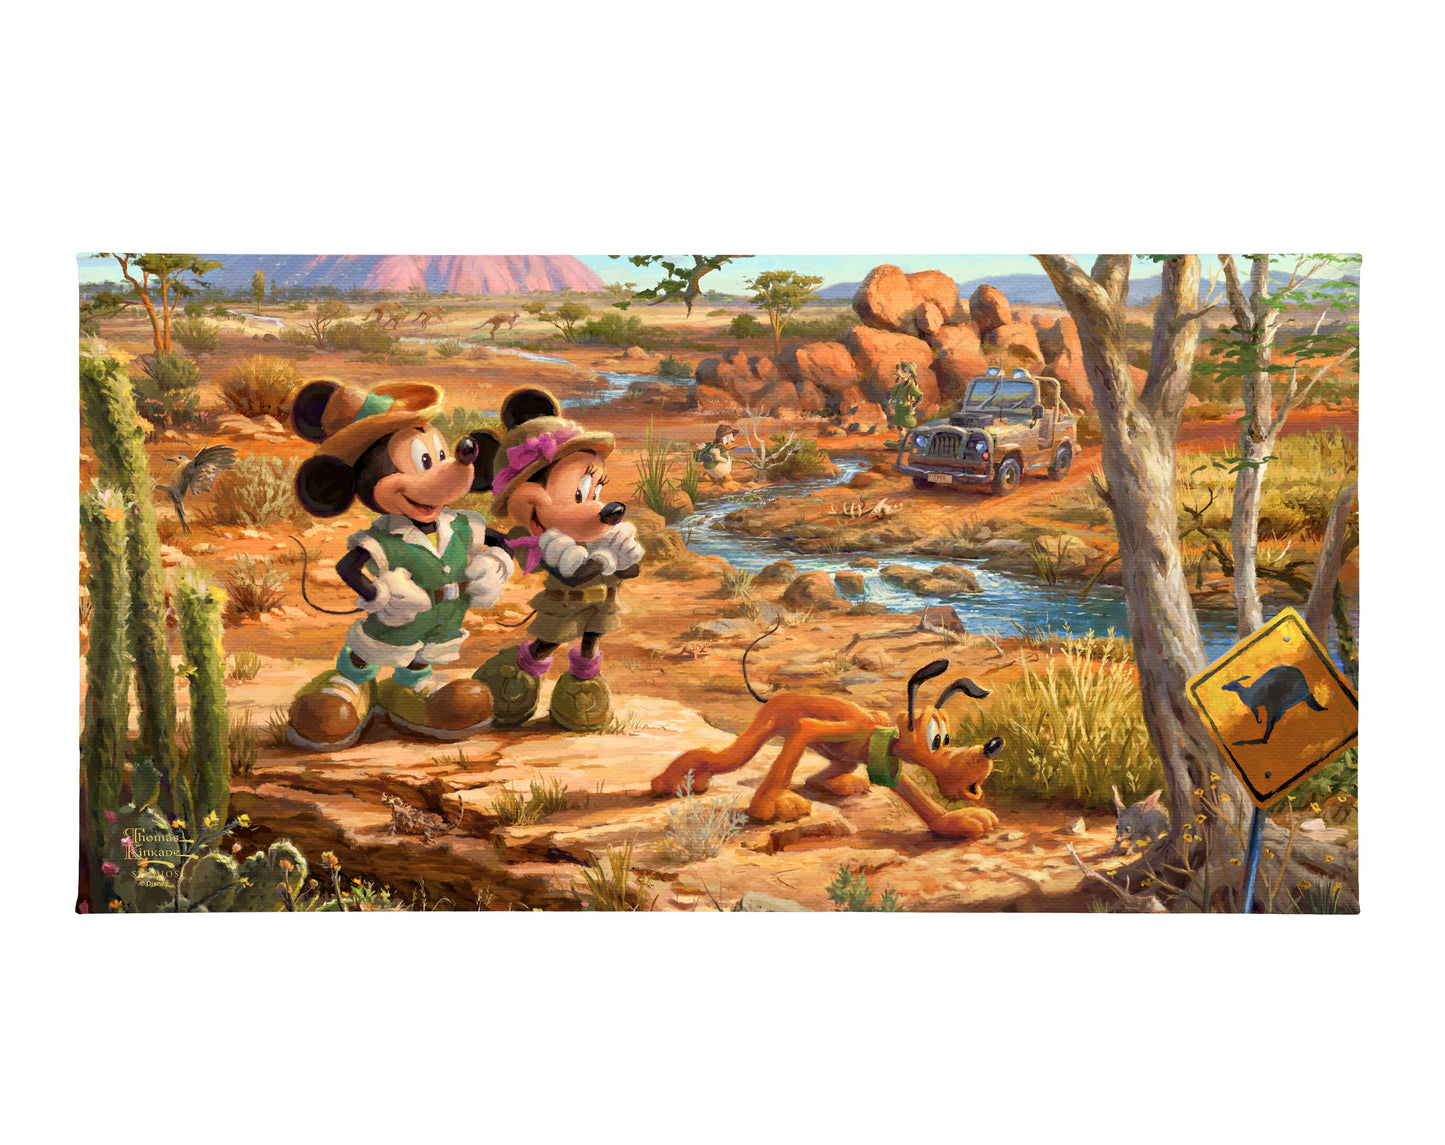 161687_CGW M&M In The Outback 16X31 Gallery Wrap Canvas_F_Mocked.jpg